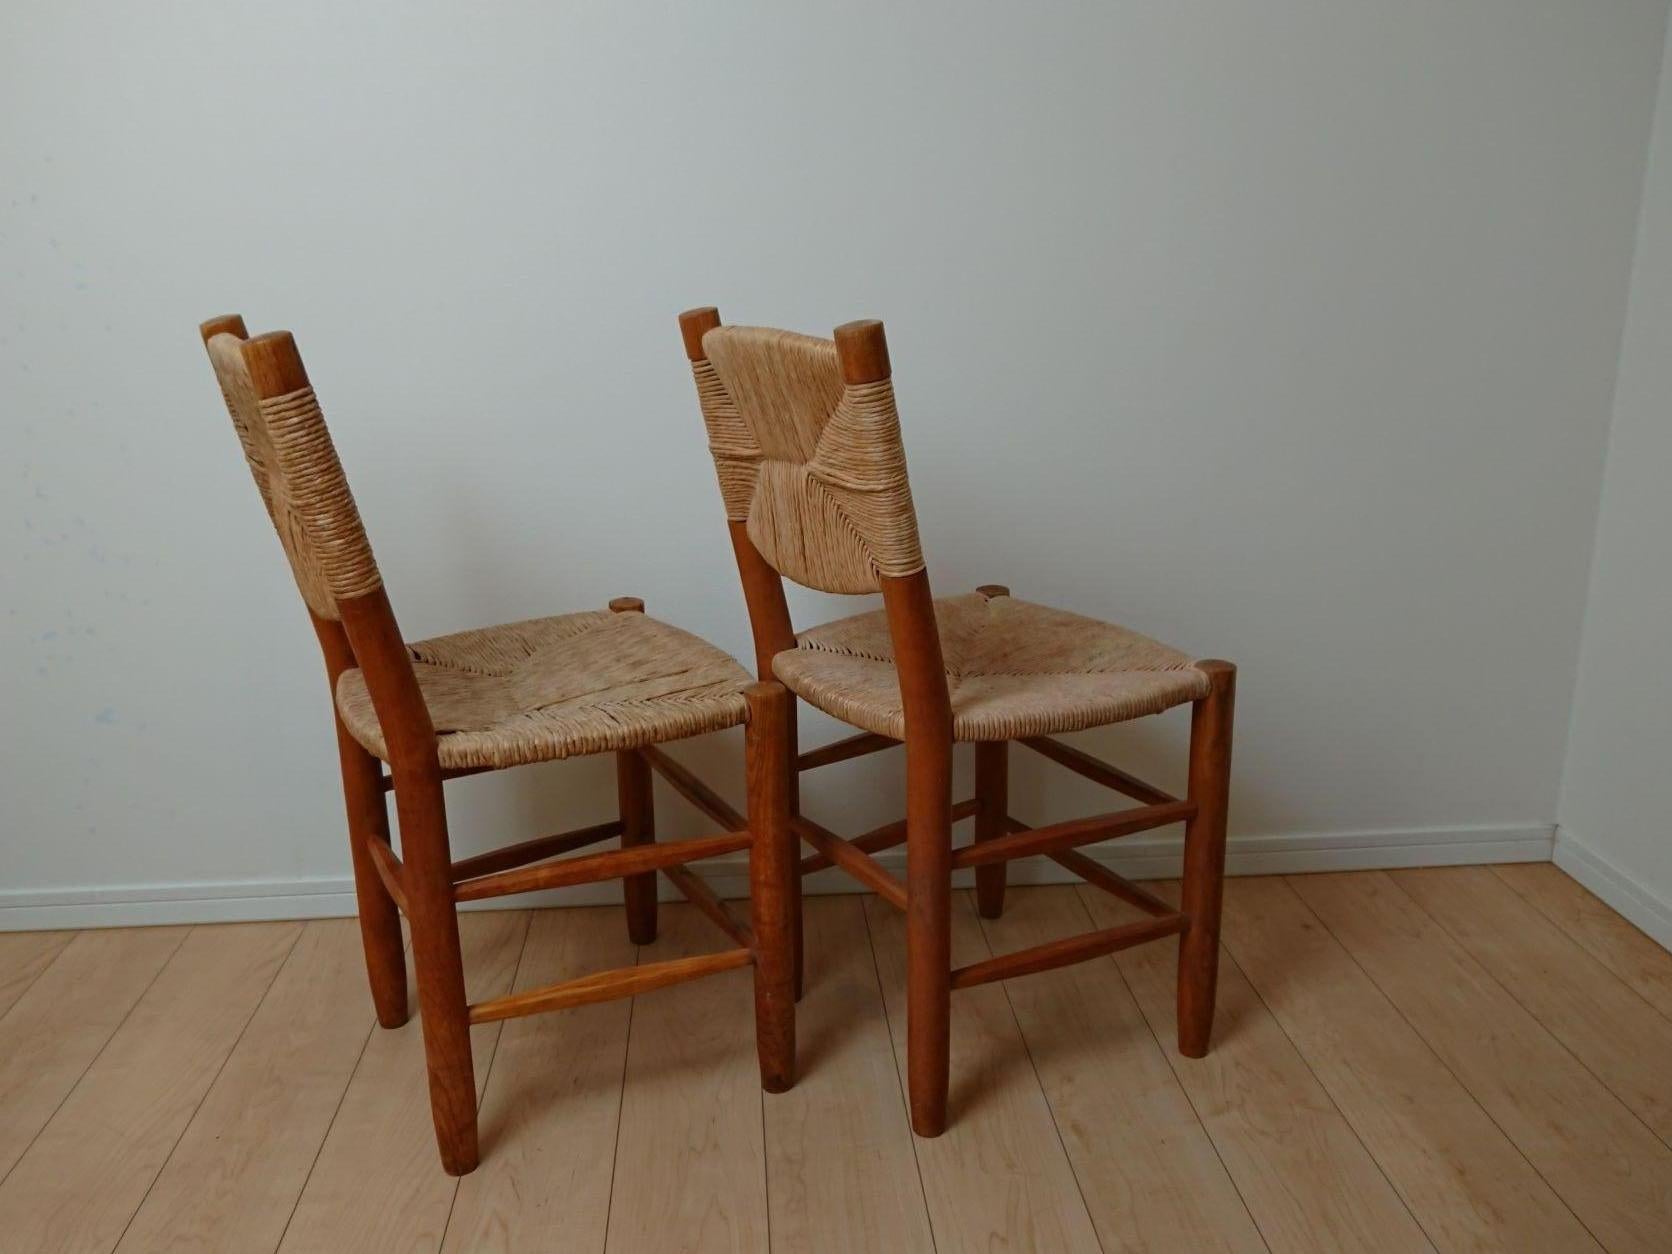 Solid Wood Side Chairs N゜19 ‘’ Bauche’’ from Bcb, Designed by Perriand 'Pair' In Good Condition For Sale In London, GB